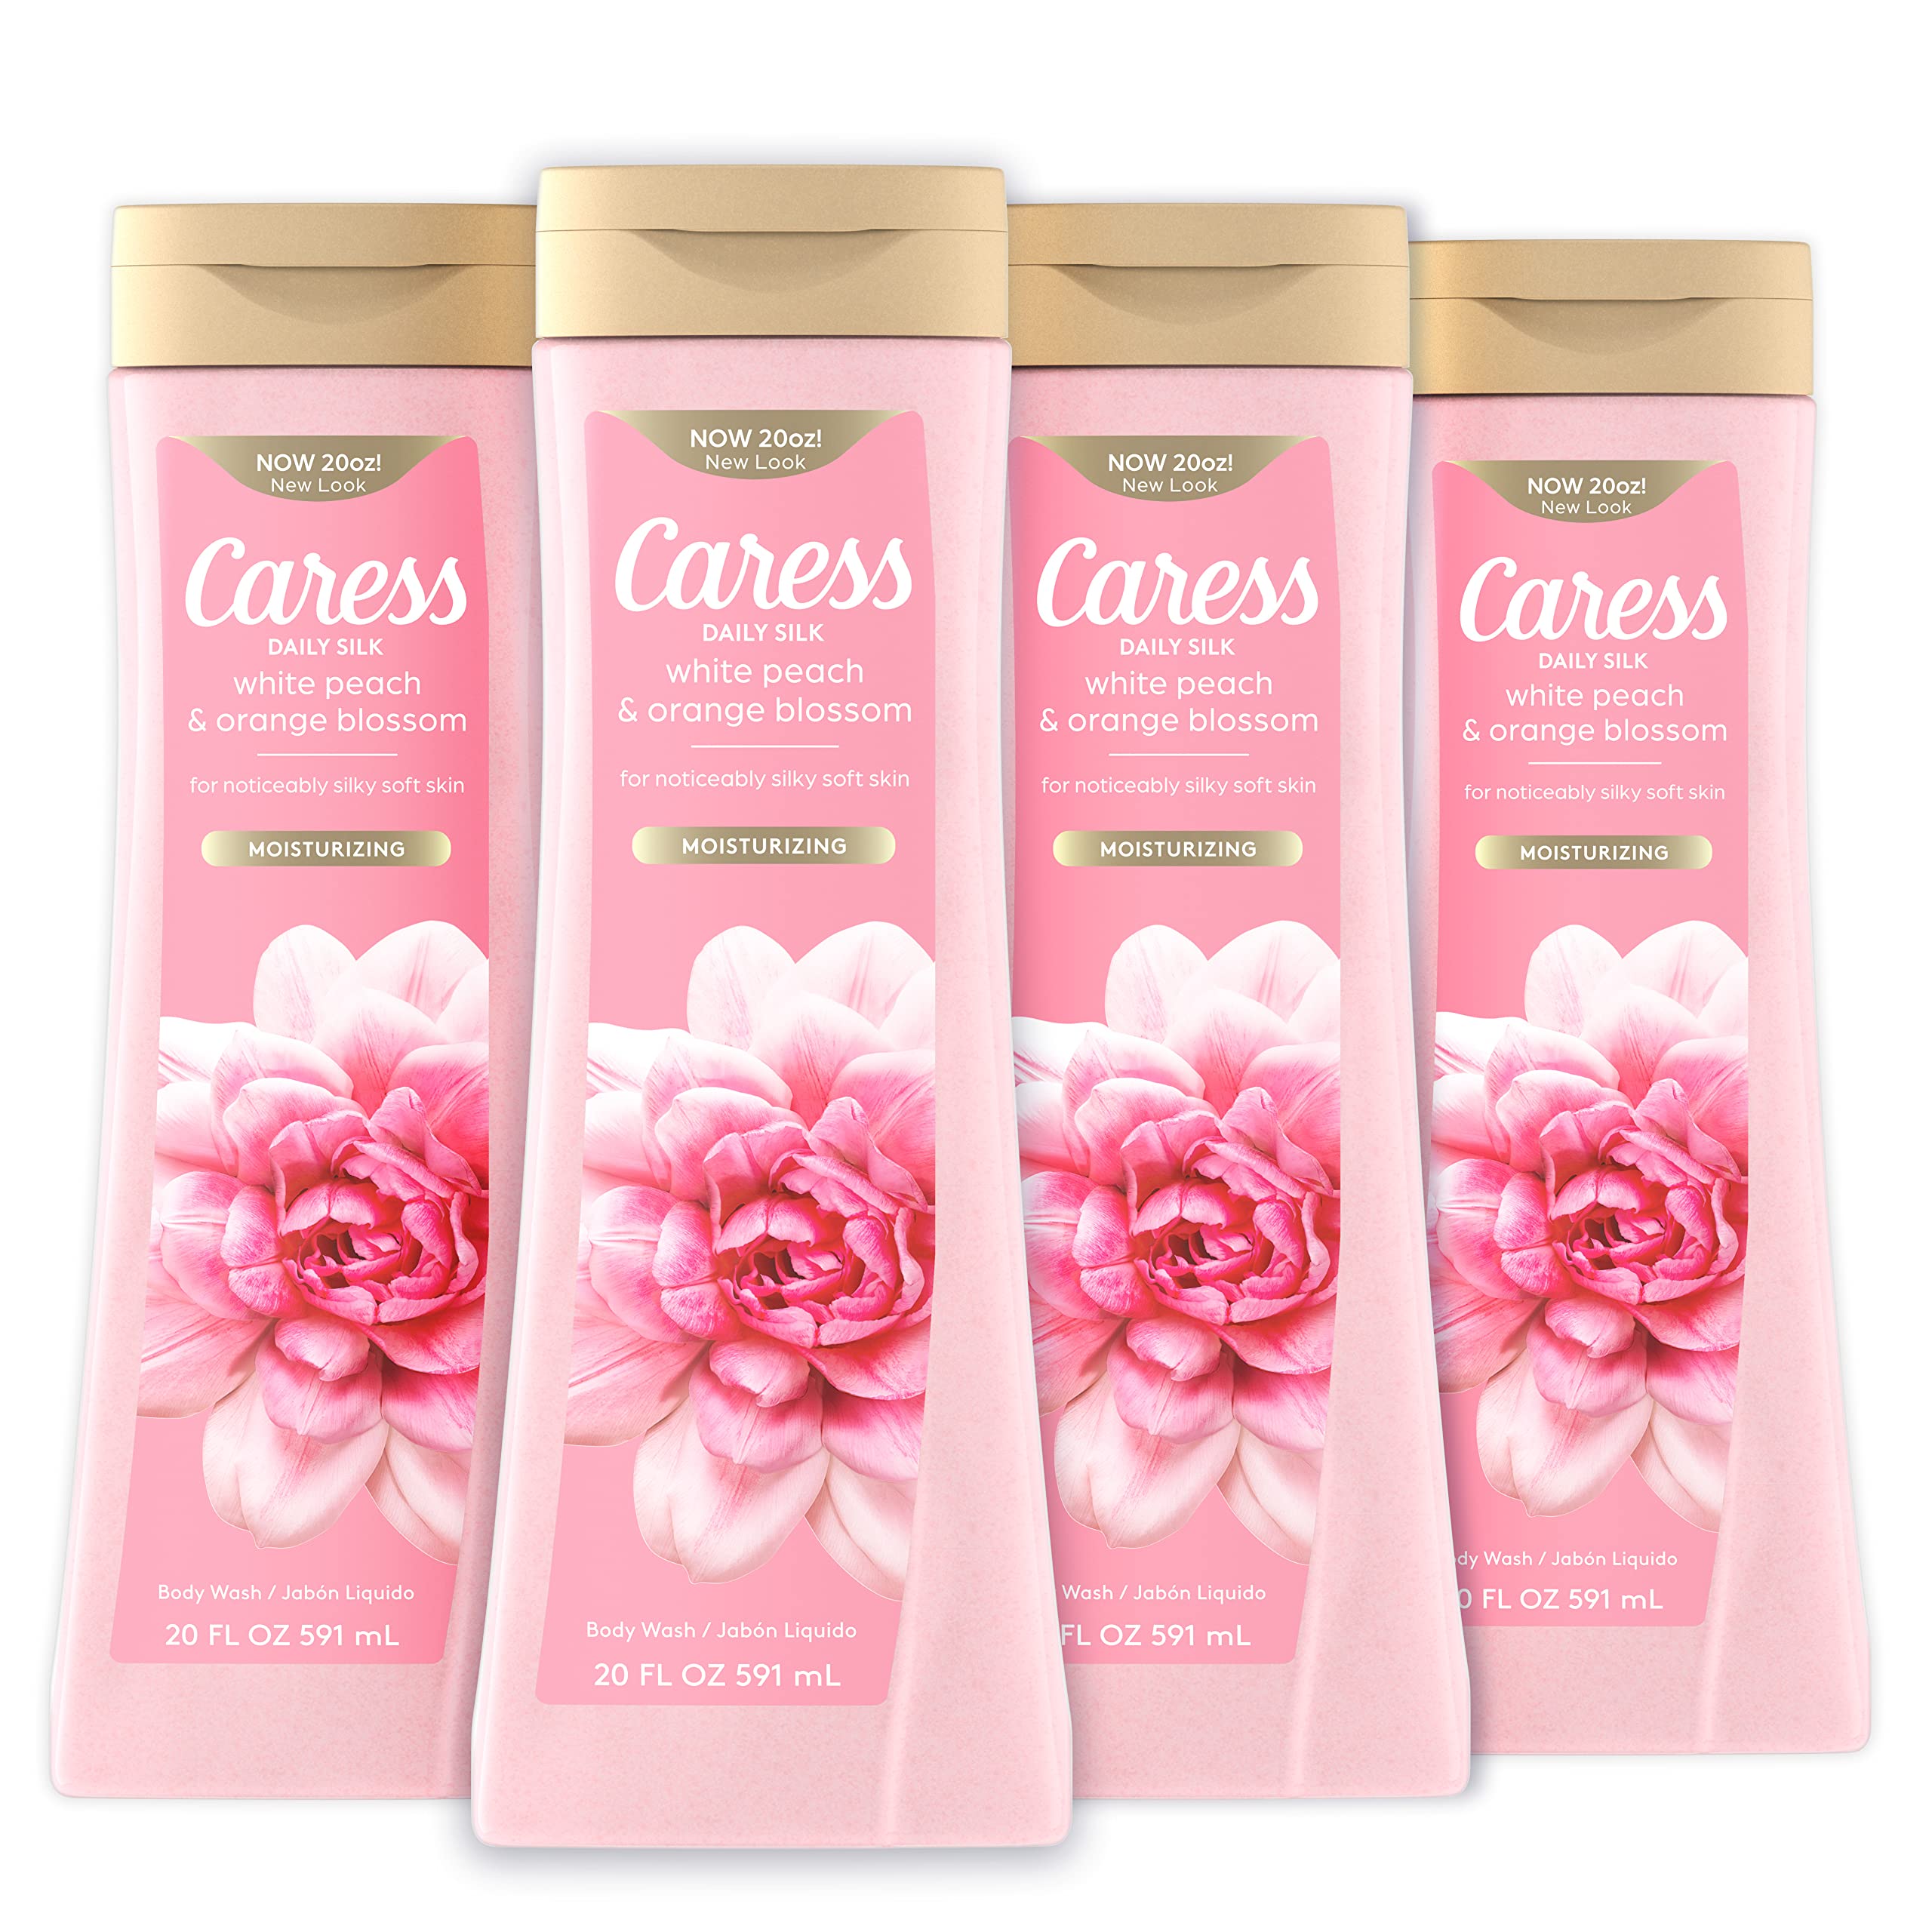 Caress Body Wash With Silk Extract For Noticeably Silky, Soft Skin Daily Silk Body Soap With White Peach & Orange Blossom 20 fl oz 4 pack